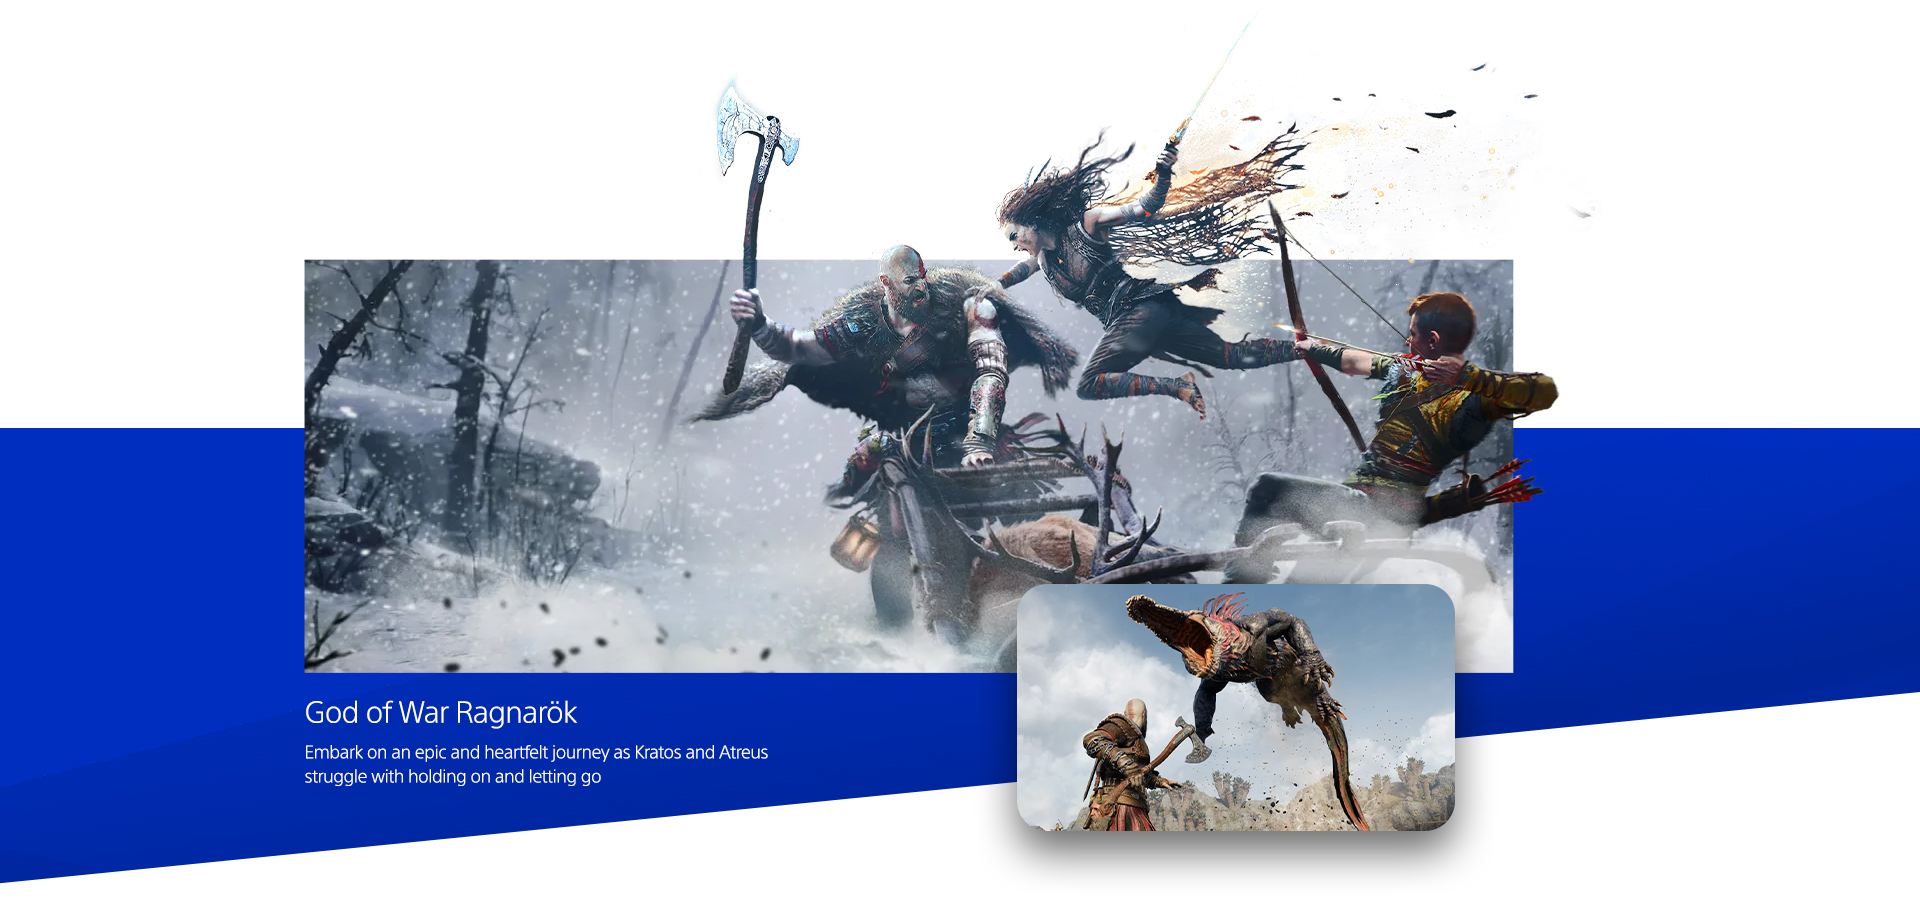 Playstation Games Content Blocks 4.26.23GOW